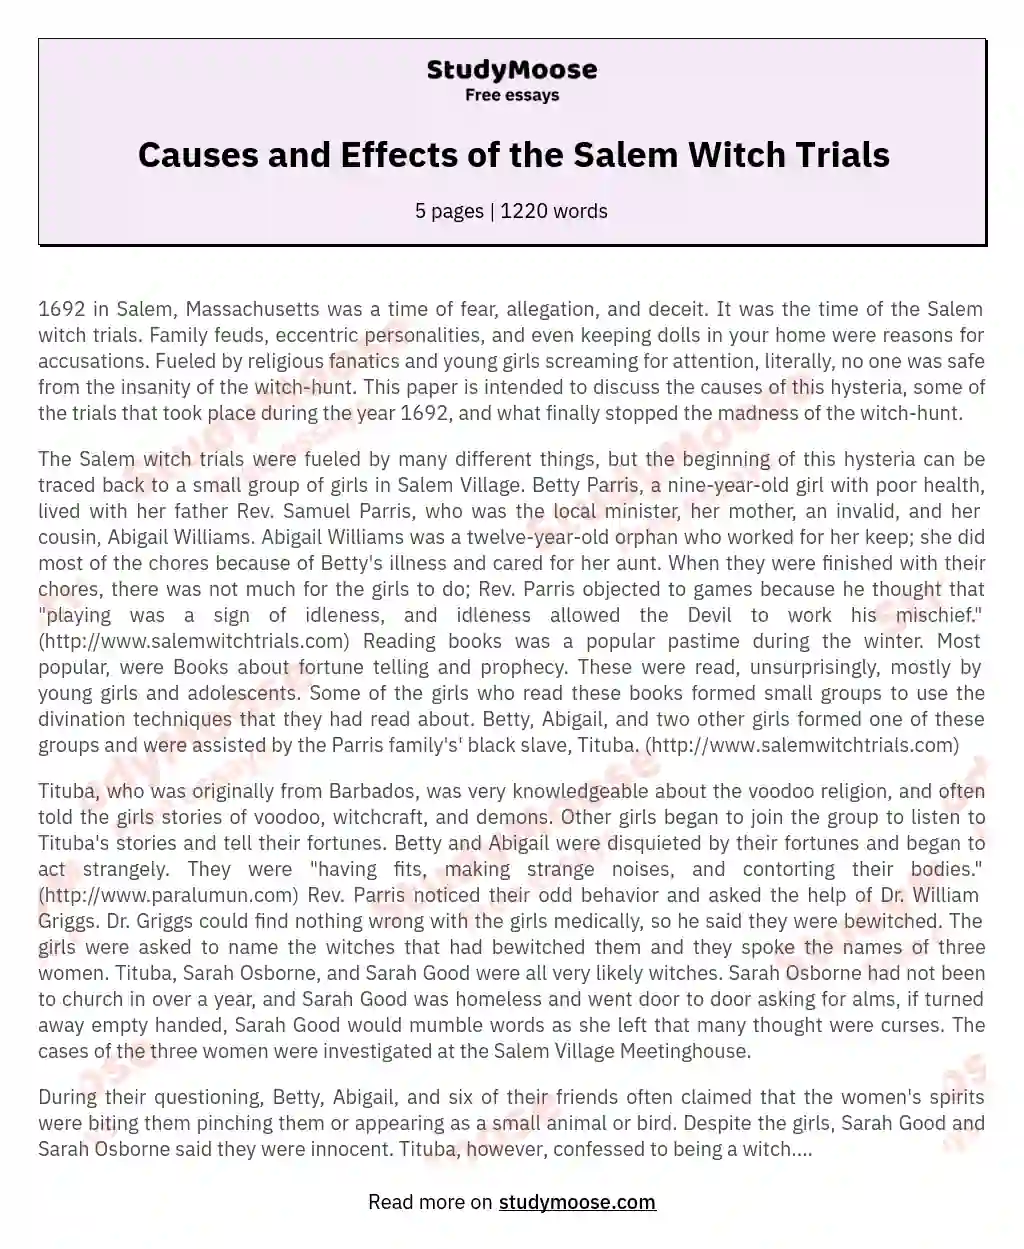 Root Causes and Trials of the Salem Witch Hysteria essay